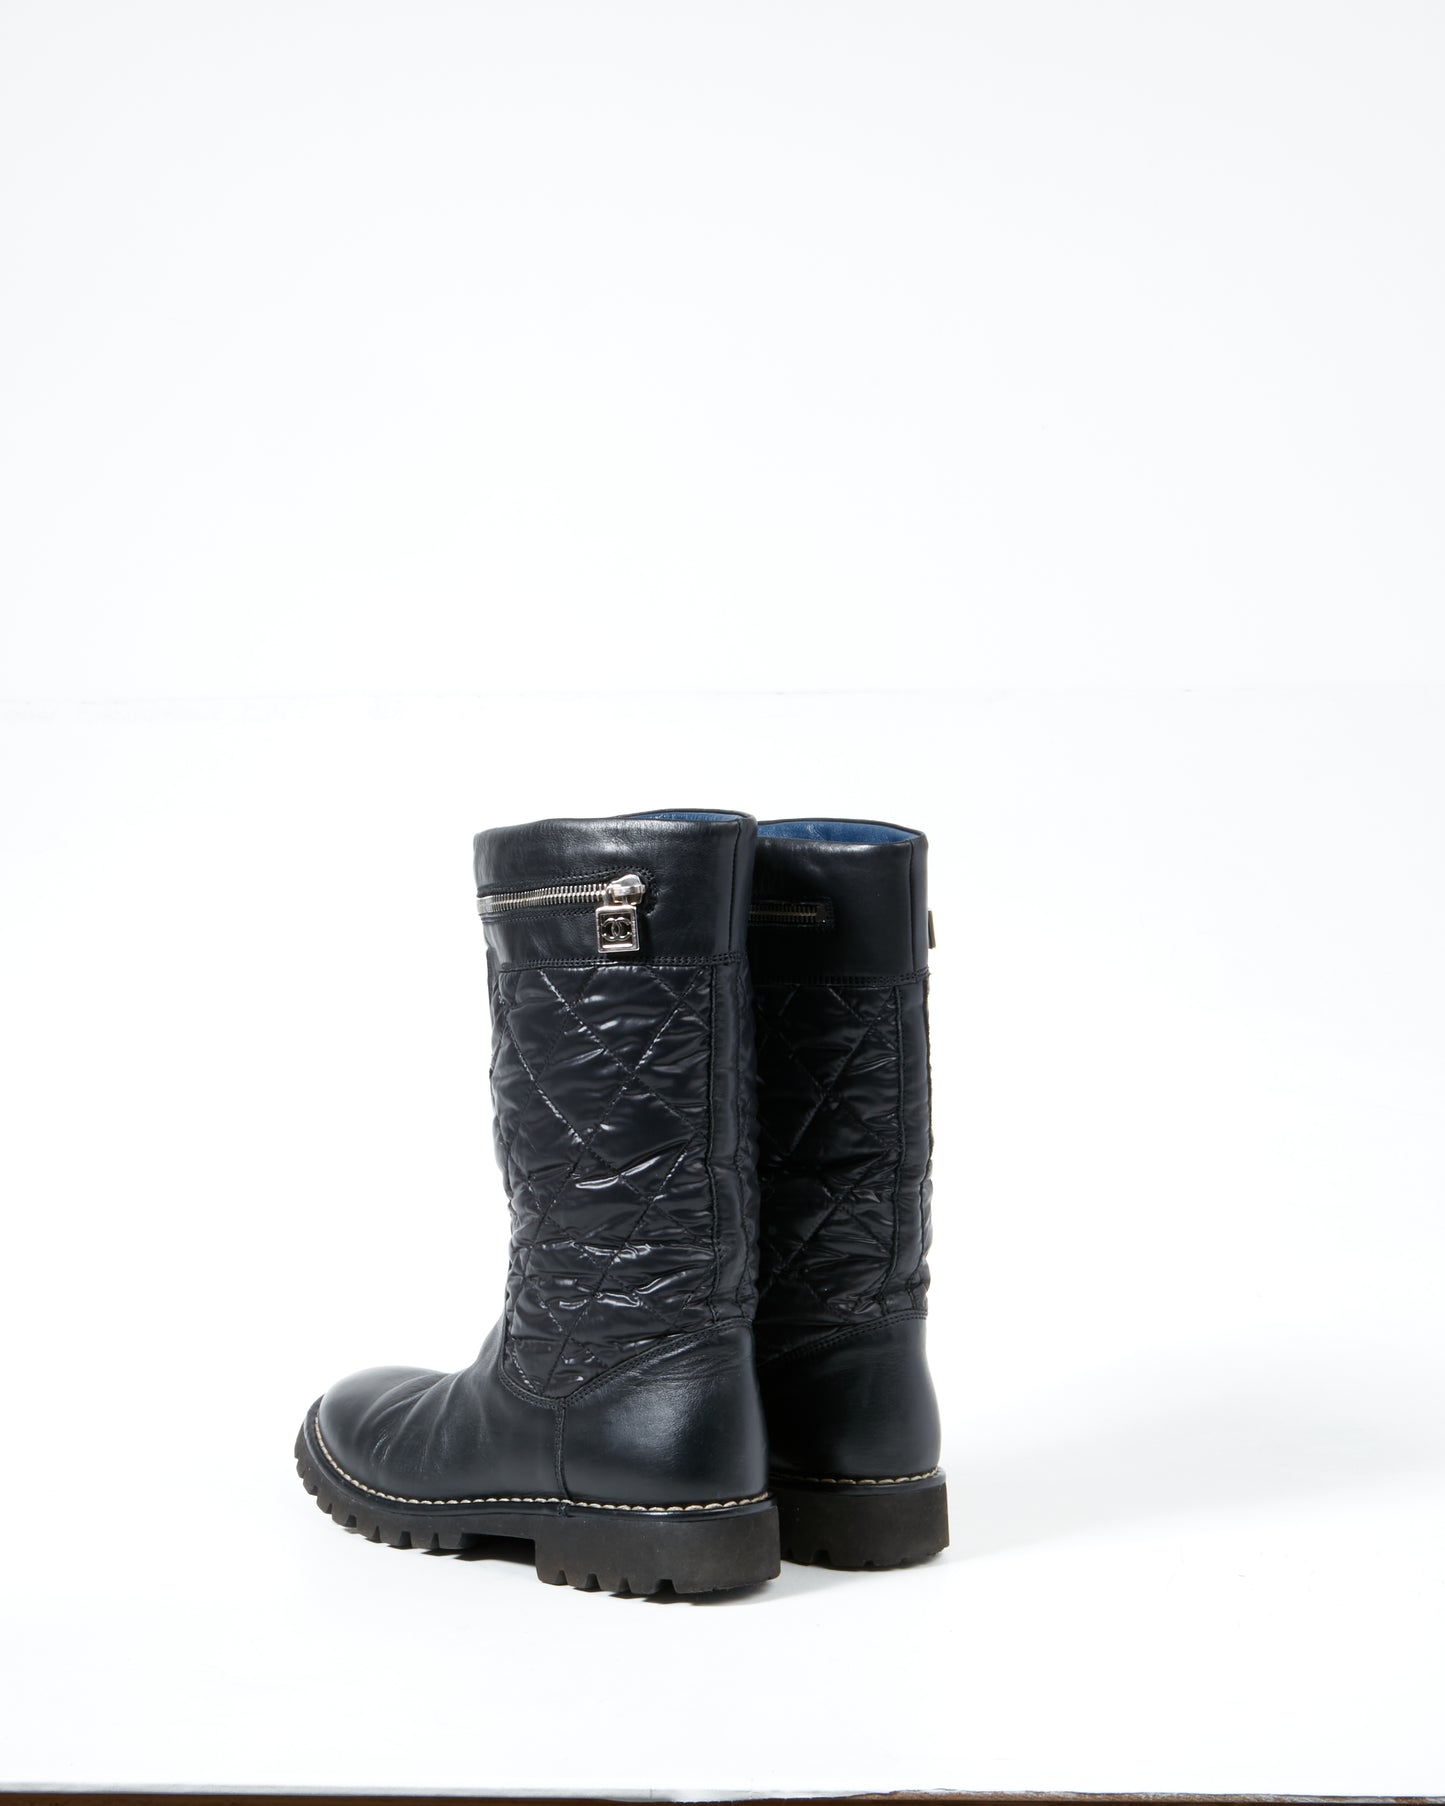 Chanel Black Nylon/Leather Coco Cocoon Boots - 38